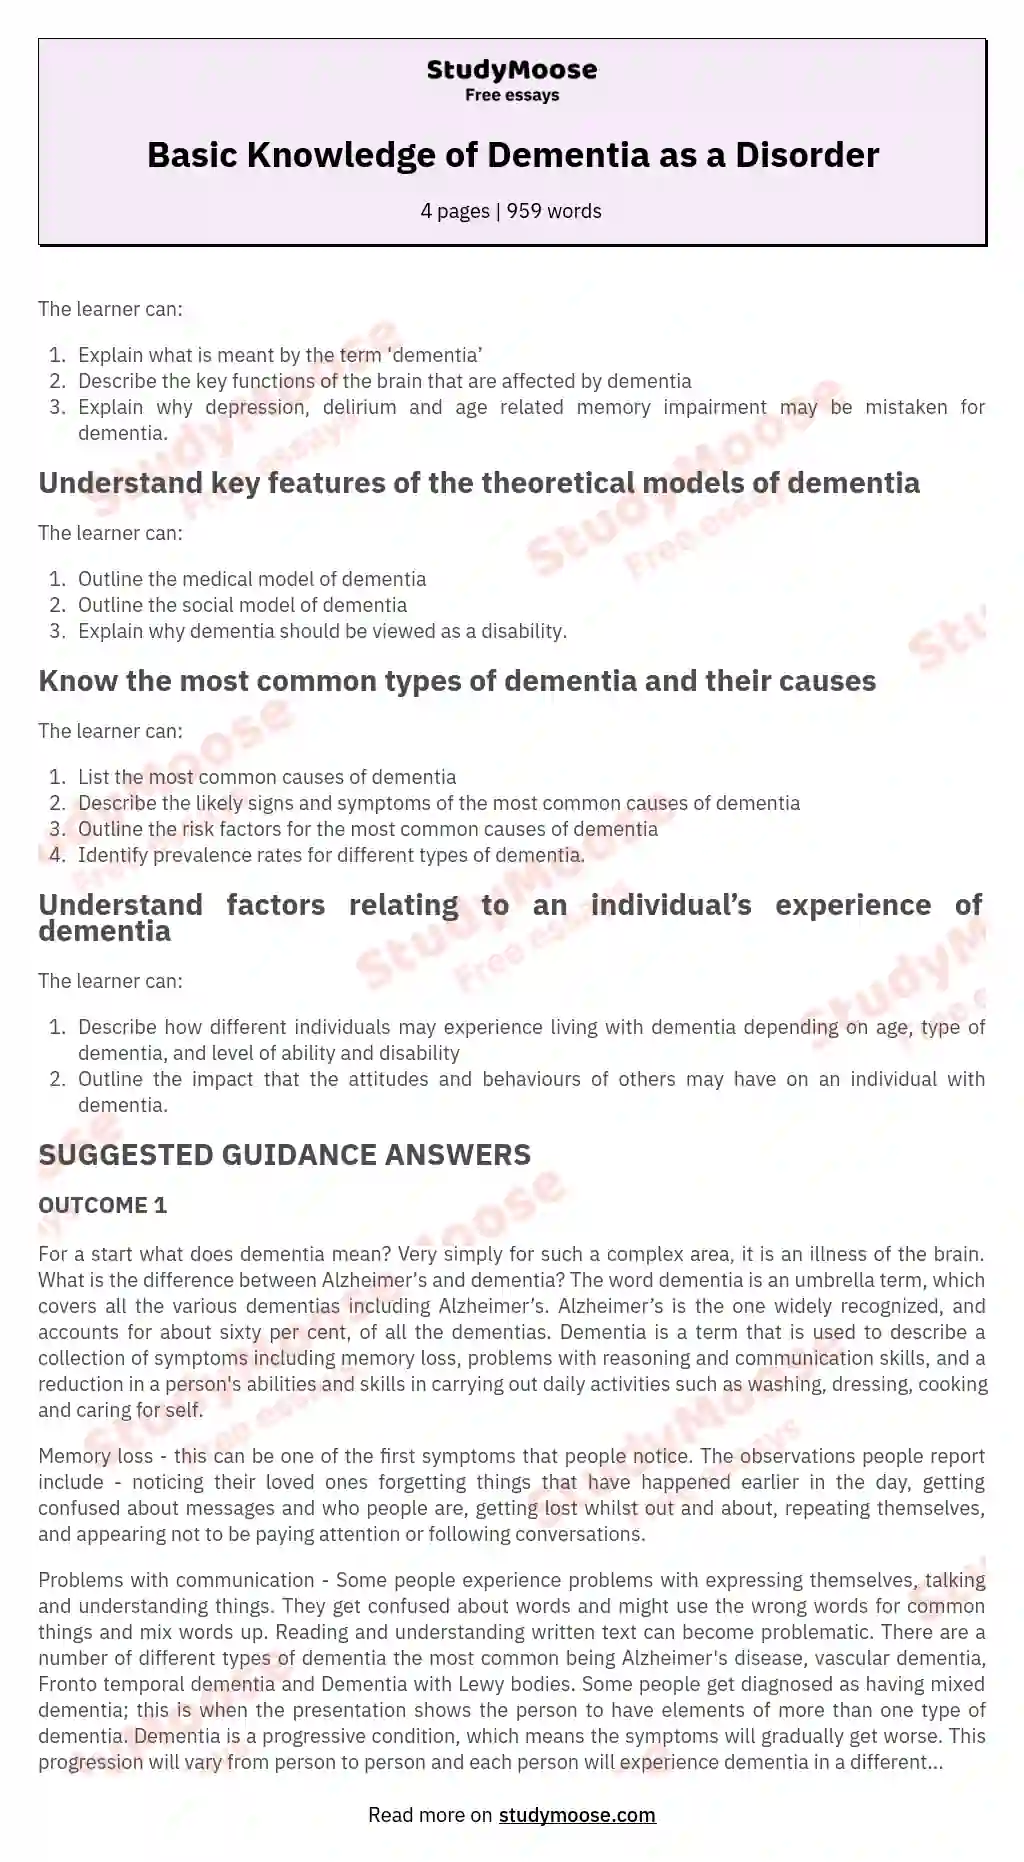 Basic Knowledge of Dementia as a Disorder essay